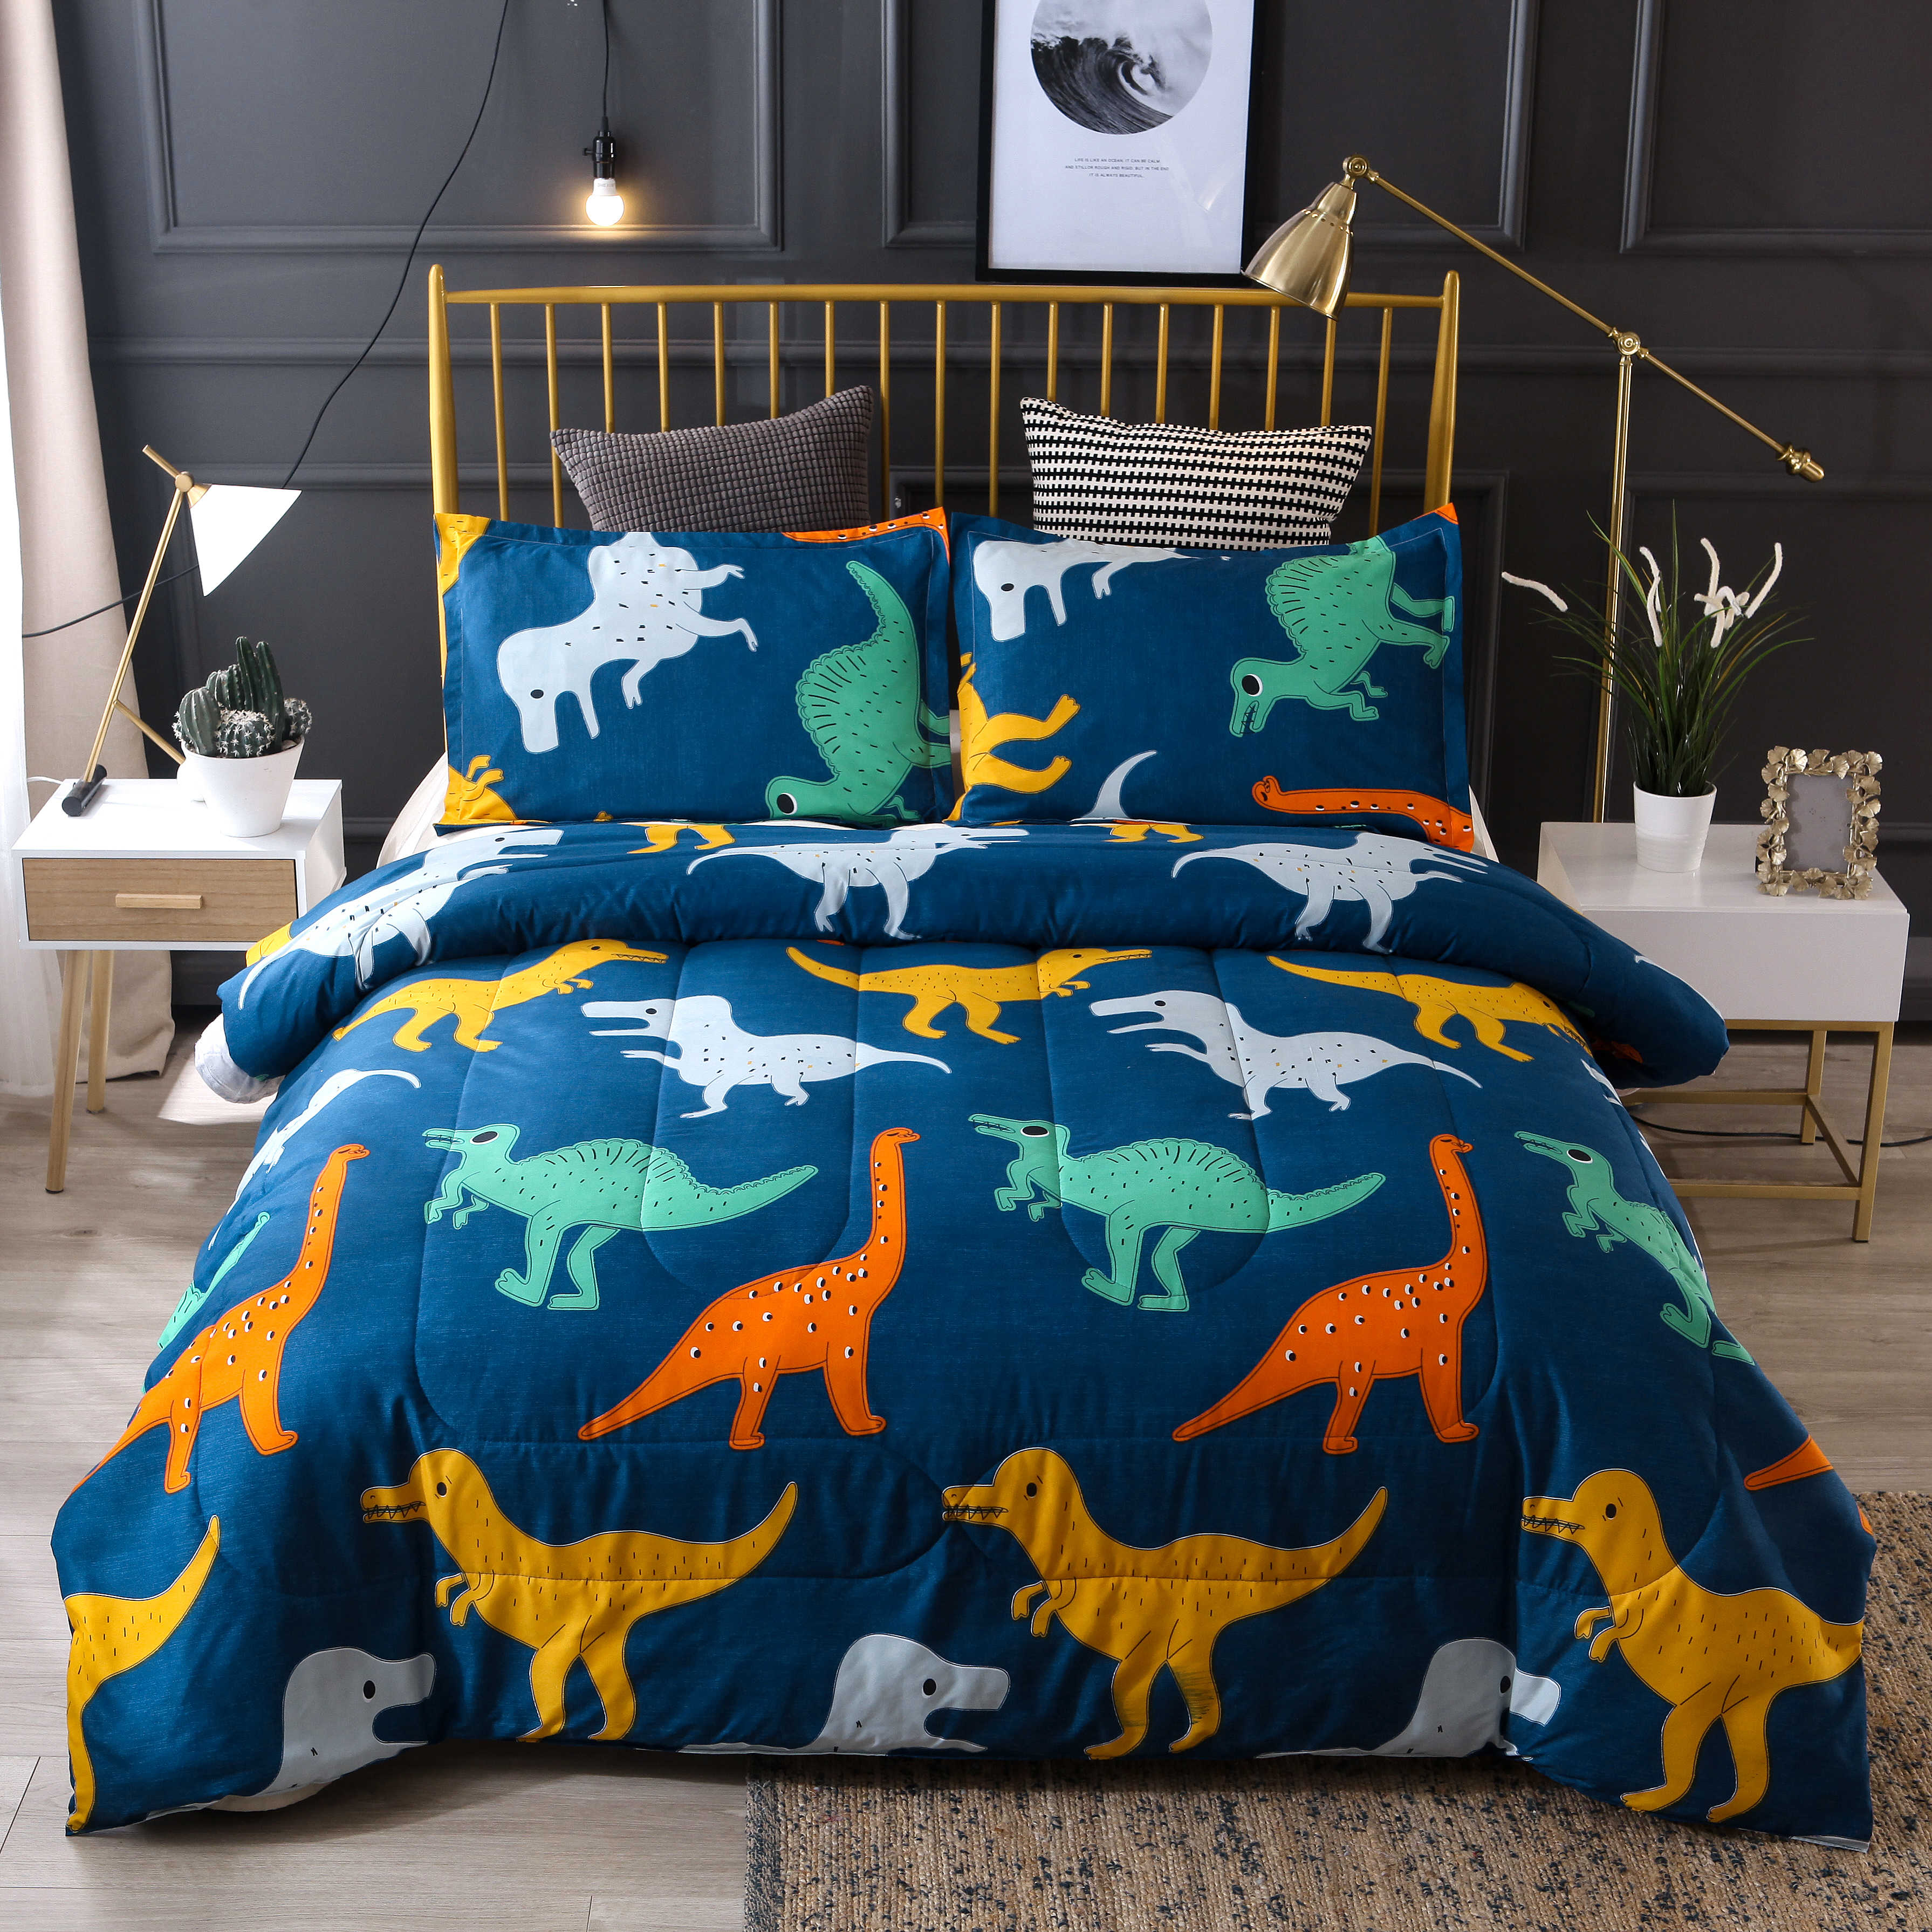 

3 PCS Bedding Sets Cartoon Dinosaur Printing Quilt Cover Pillowcase For Queen Size